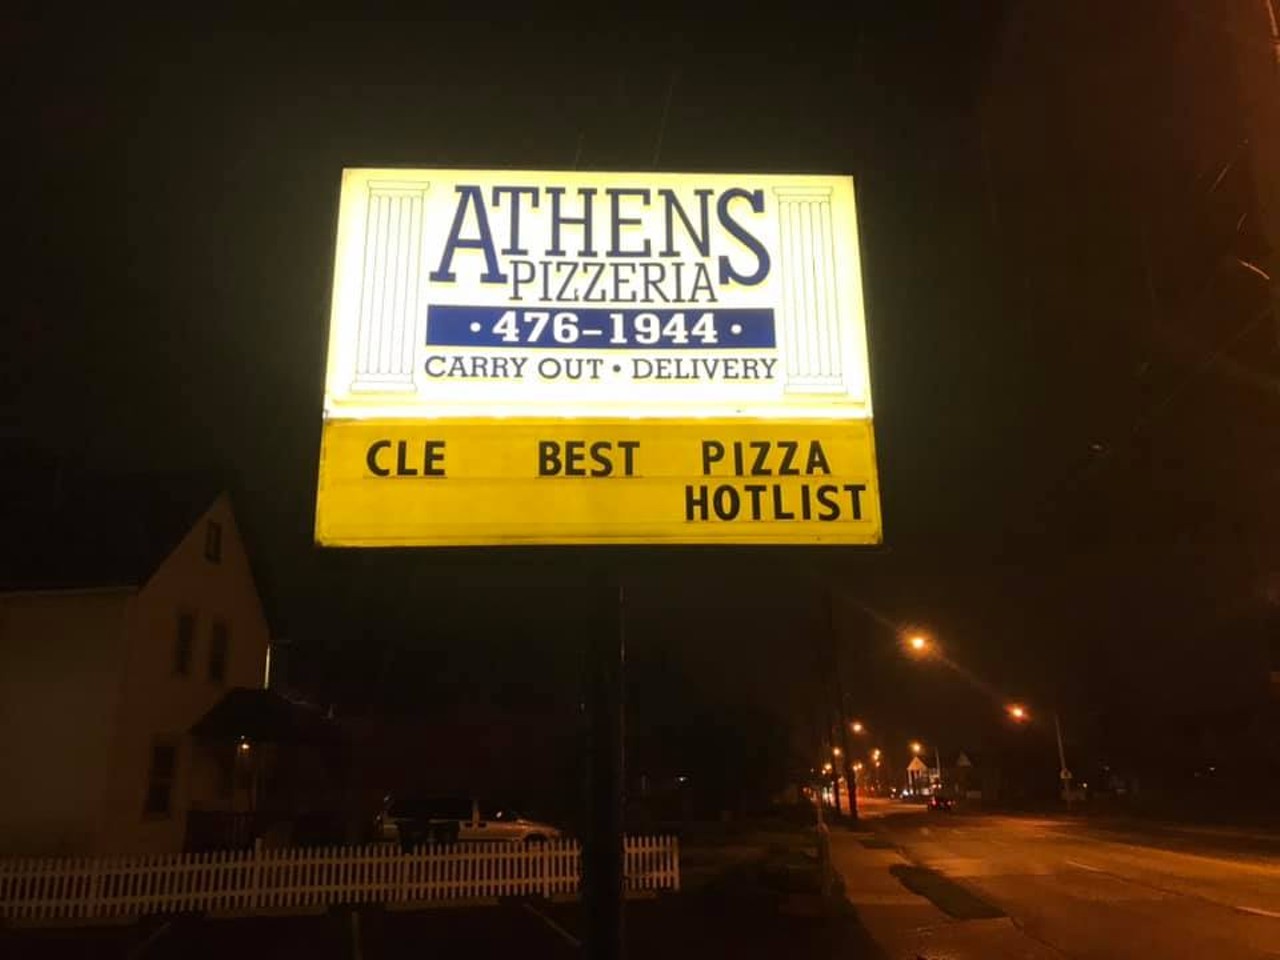  Athens Pizzeria
Multiple Locations
&#147;I love this pizza!! I have tired the food from the other pizza joints around the neighborhood and I haven't found any other that compares to Athens. I haven't been disappointed with any items I have ordered. This is my go to. The pizza is always delicious and hot and it doesn't matter if you pick up or have it delivered,&#148; Tracey P. on Yelp.
Photo via Athens Pizzeria/Facebook